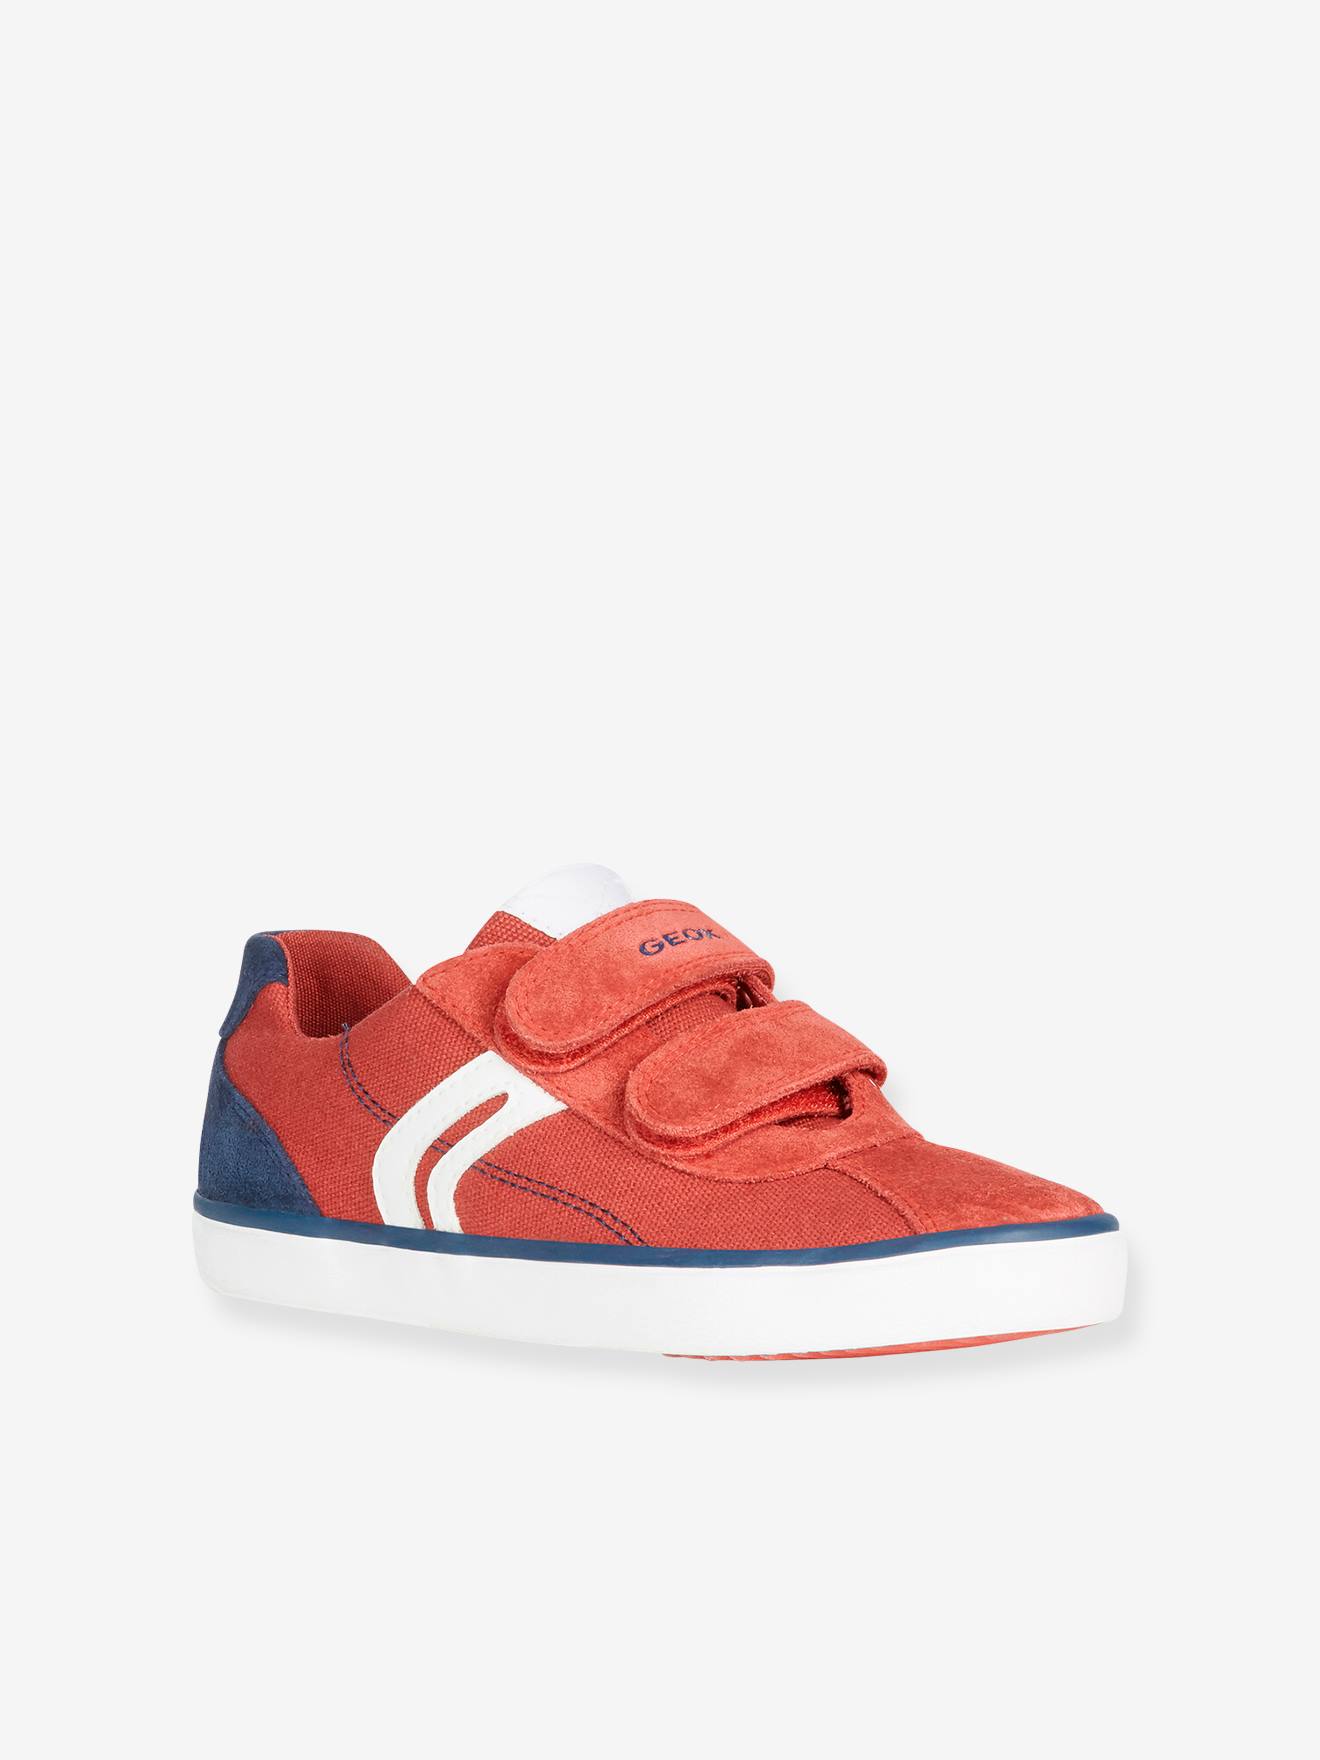 red boys trainers